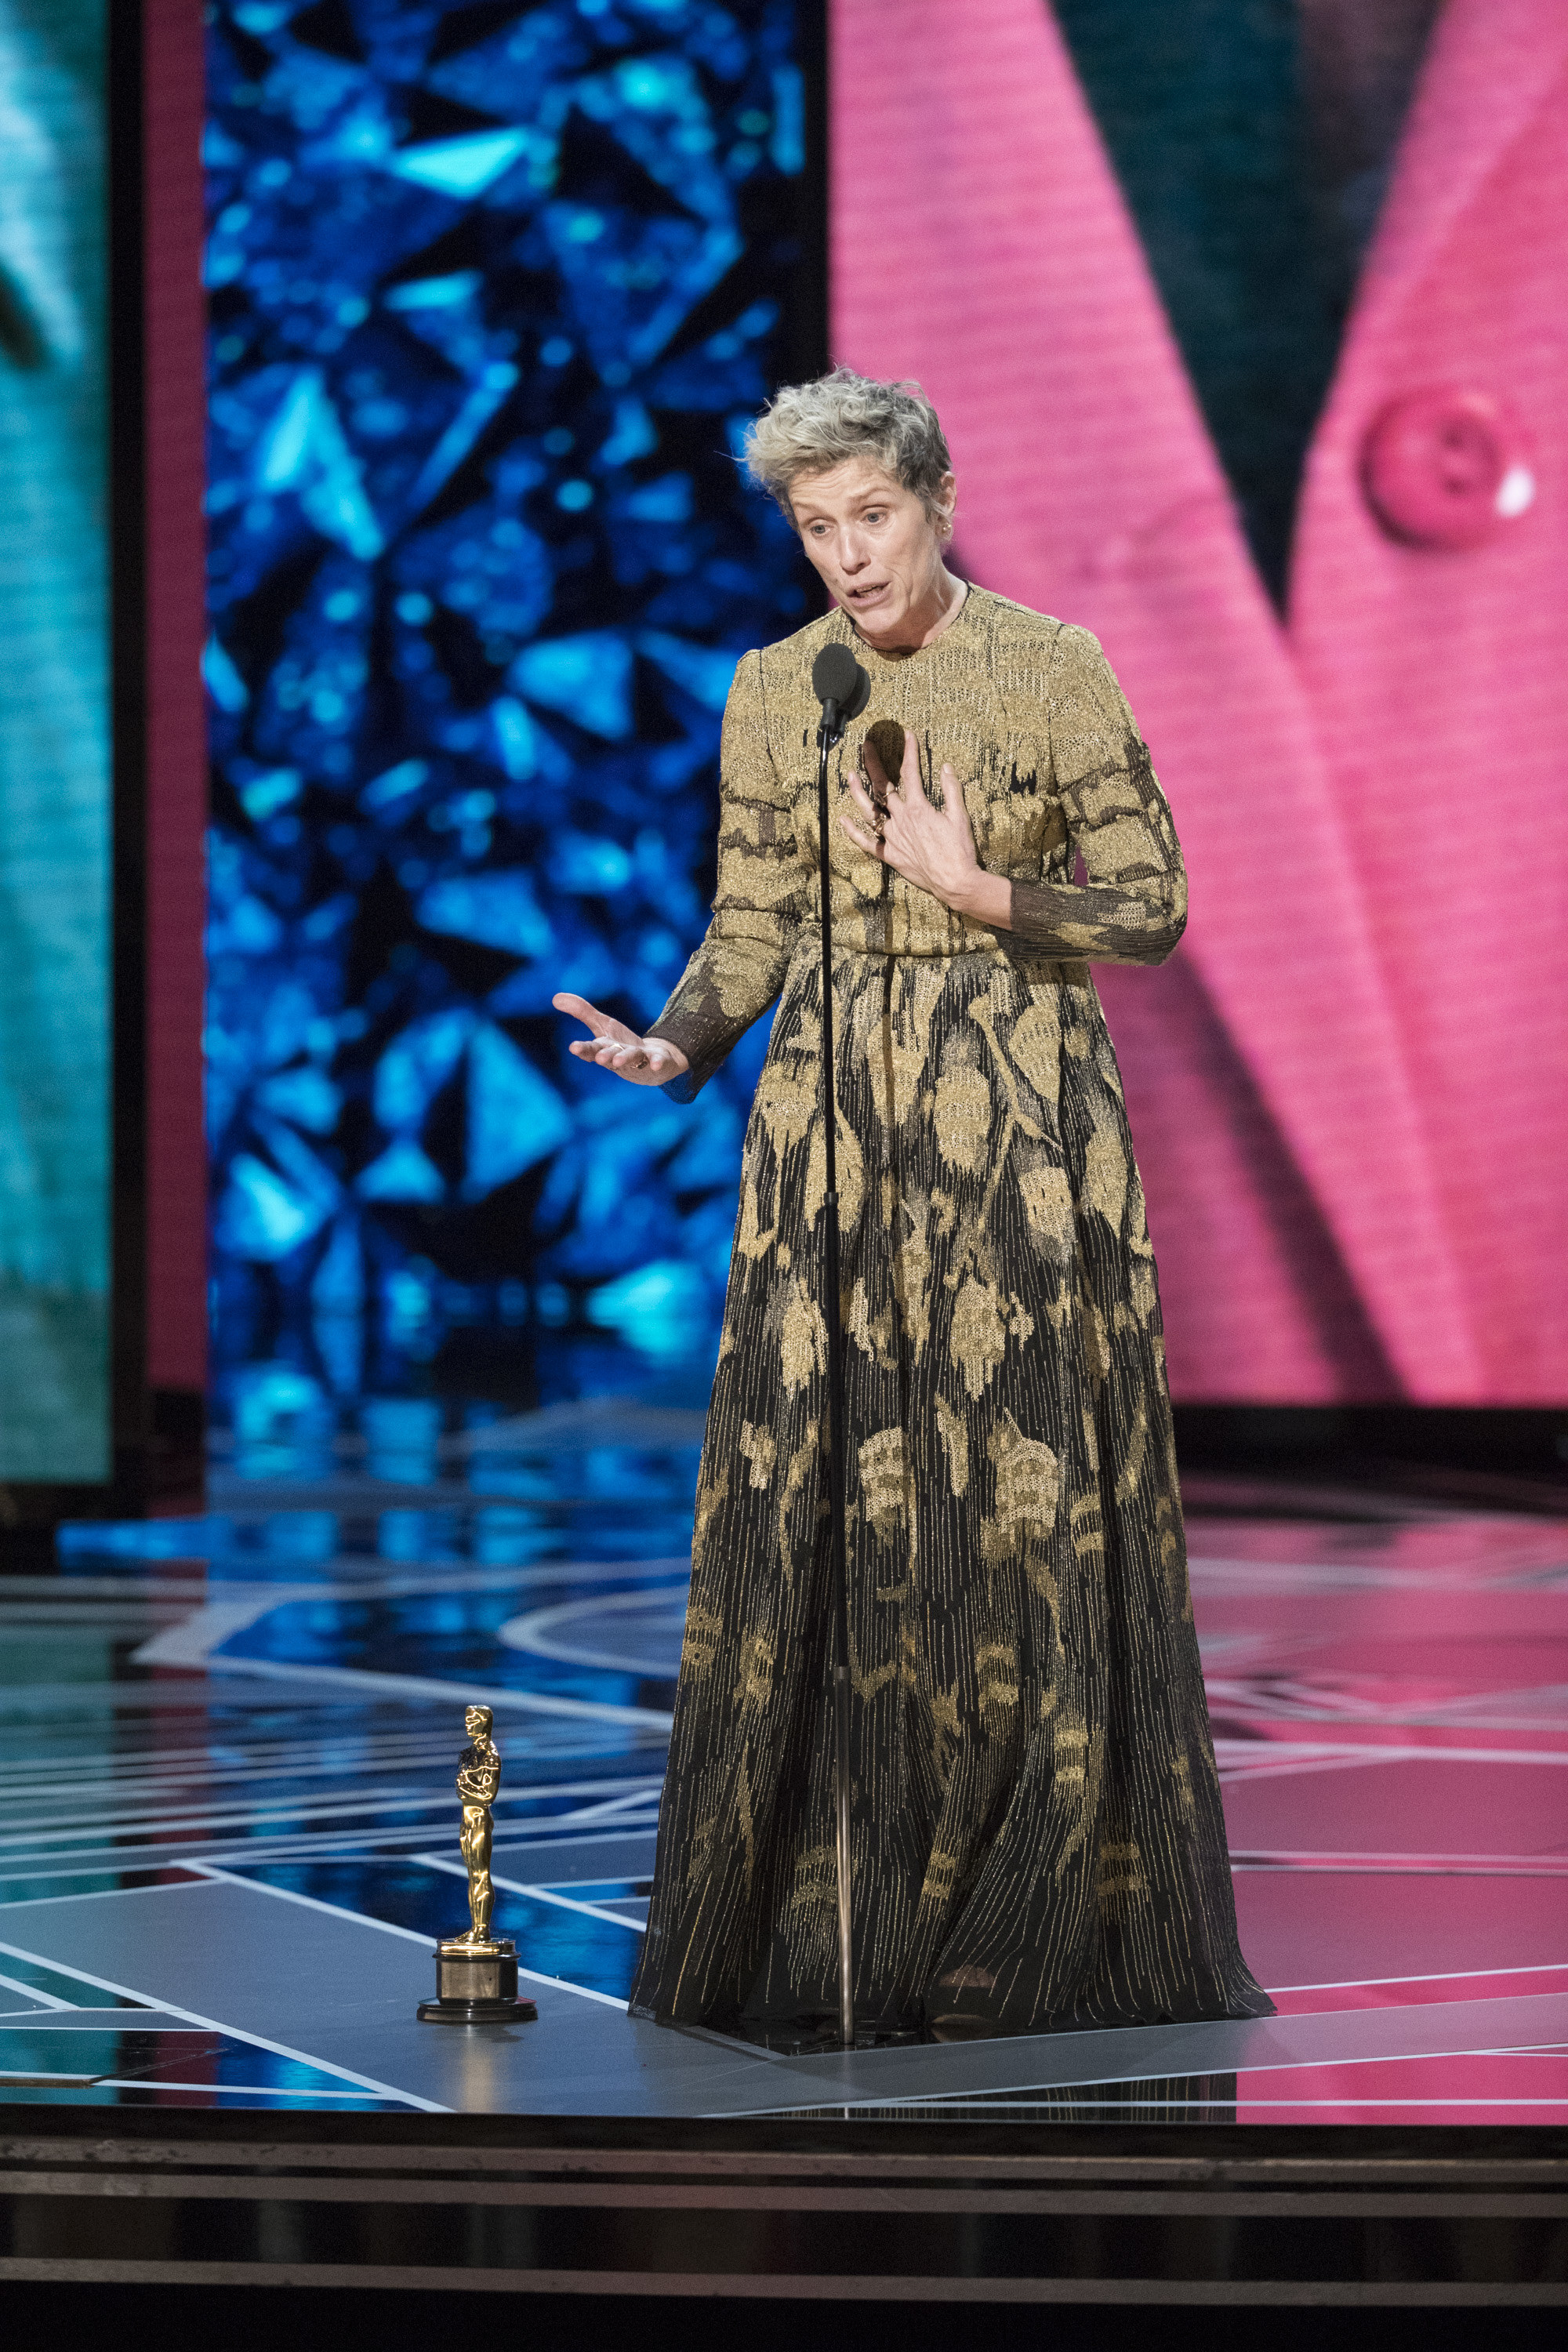 Frances McDormand wears a long black and gold dress and speaks into a microphone onstage, her Oscar statue on the floor in front of her